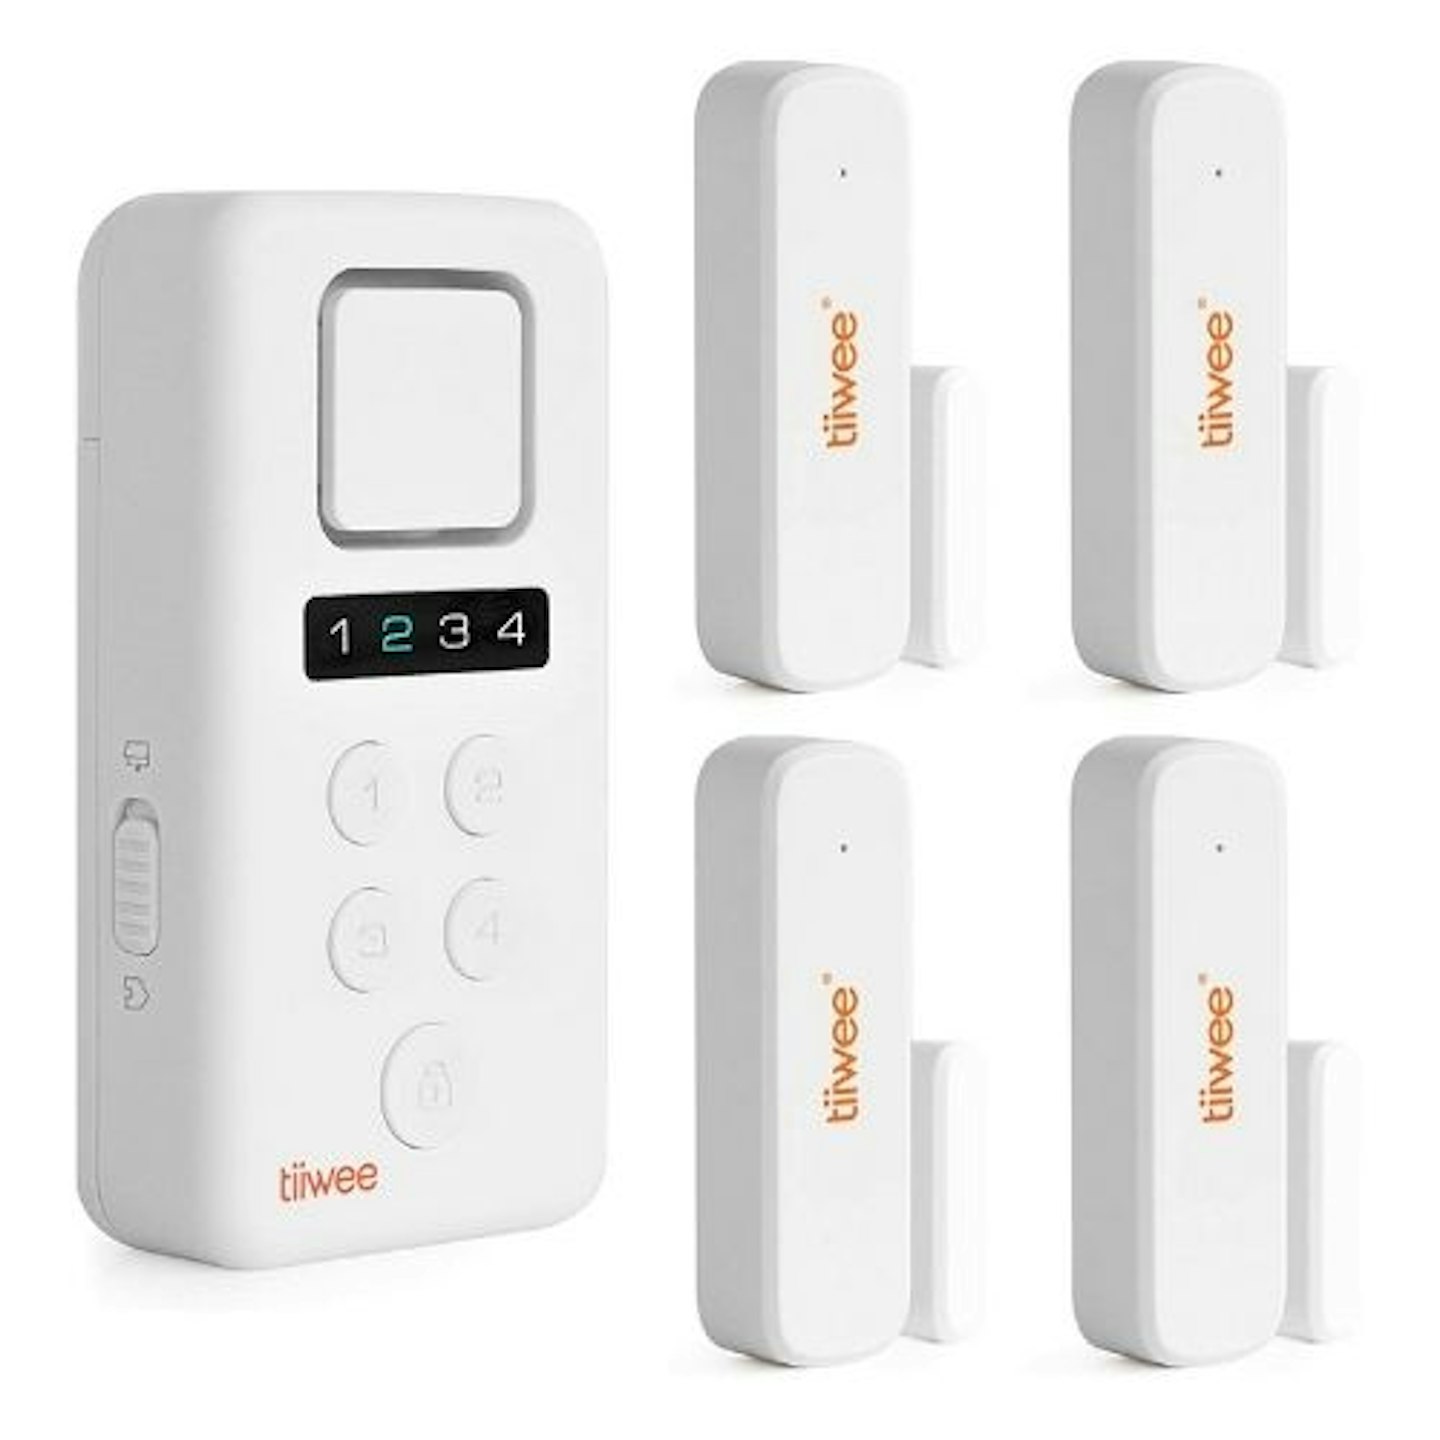 Tiiwee X3 Home Alarm System